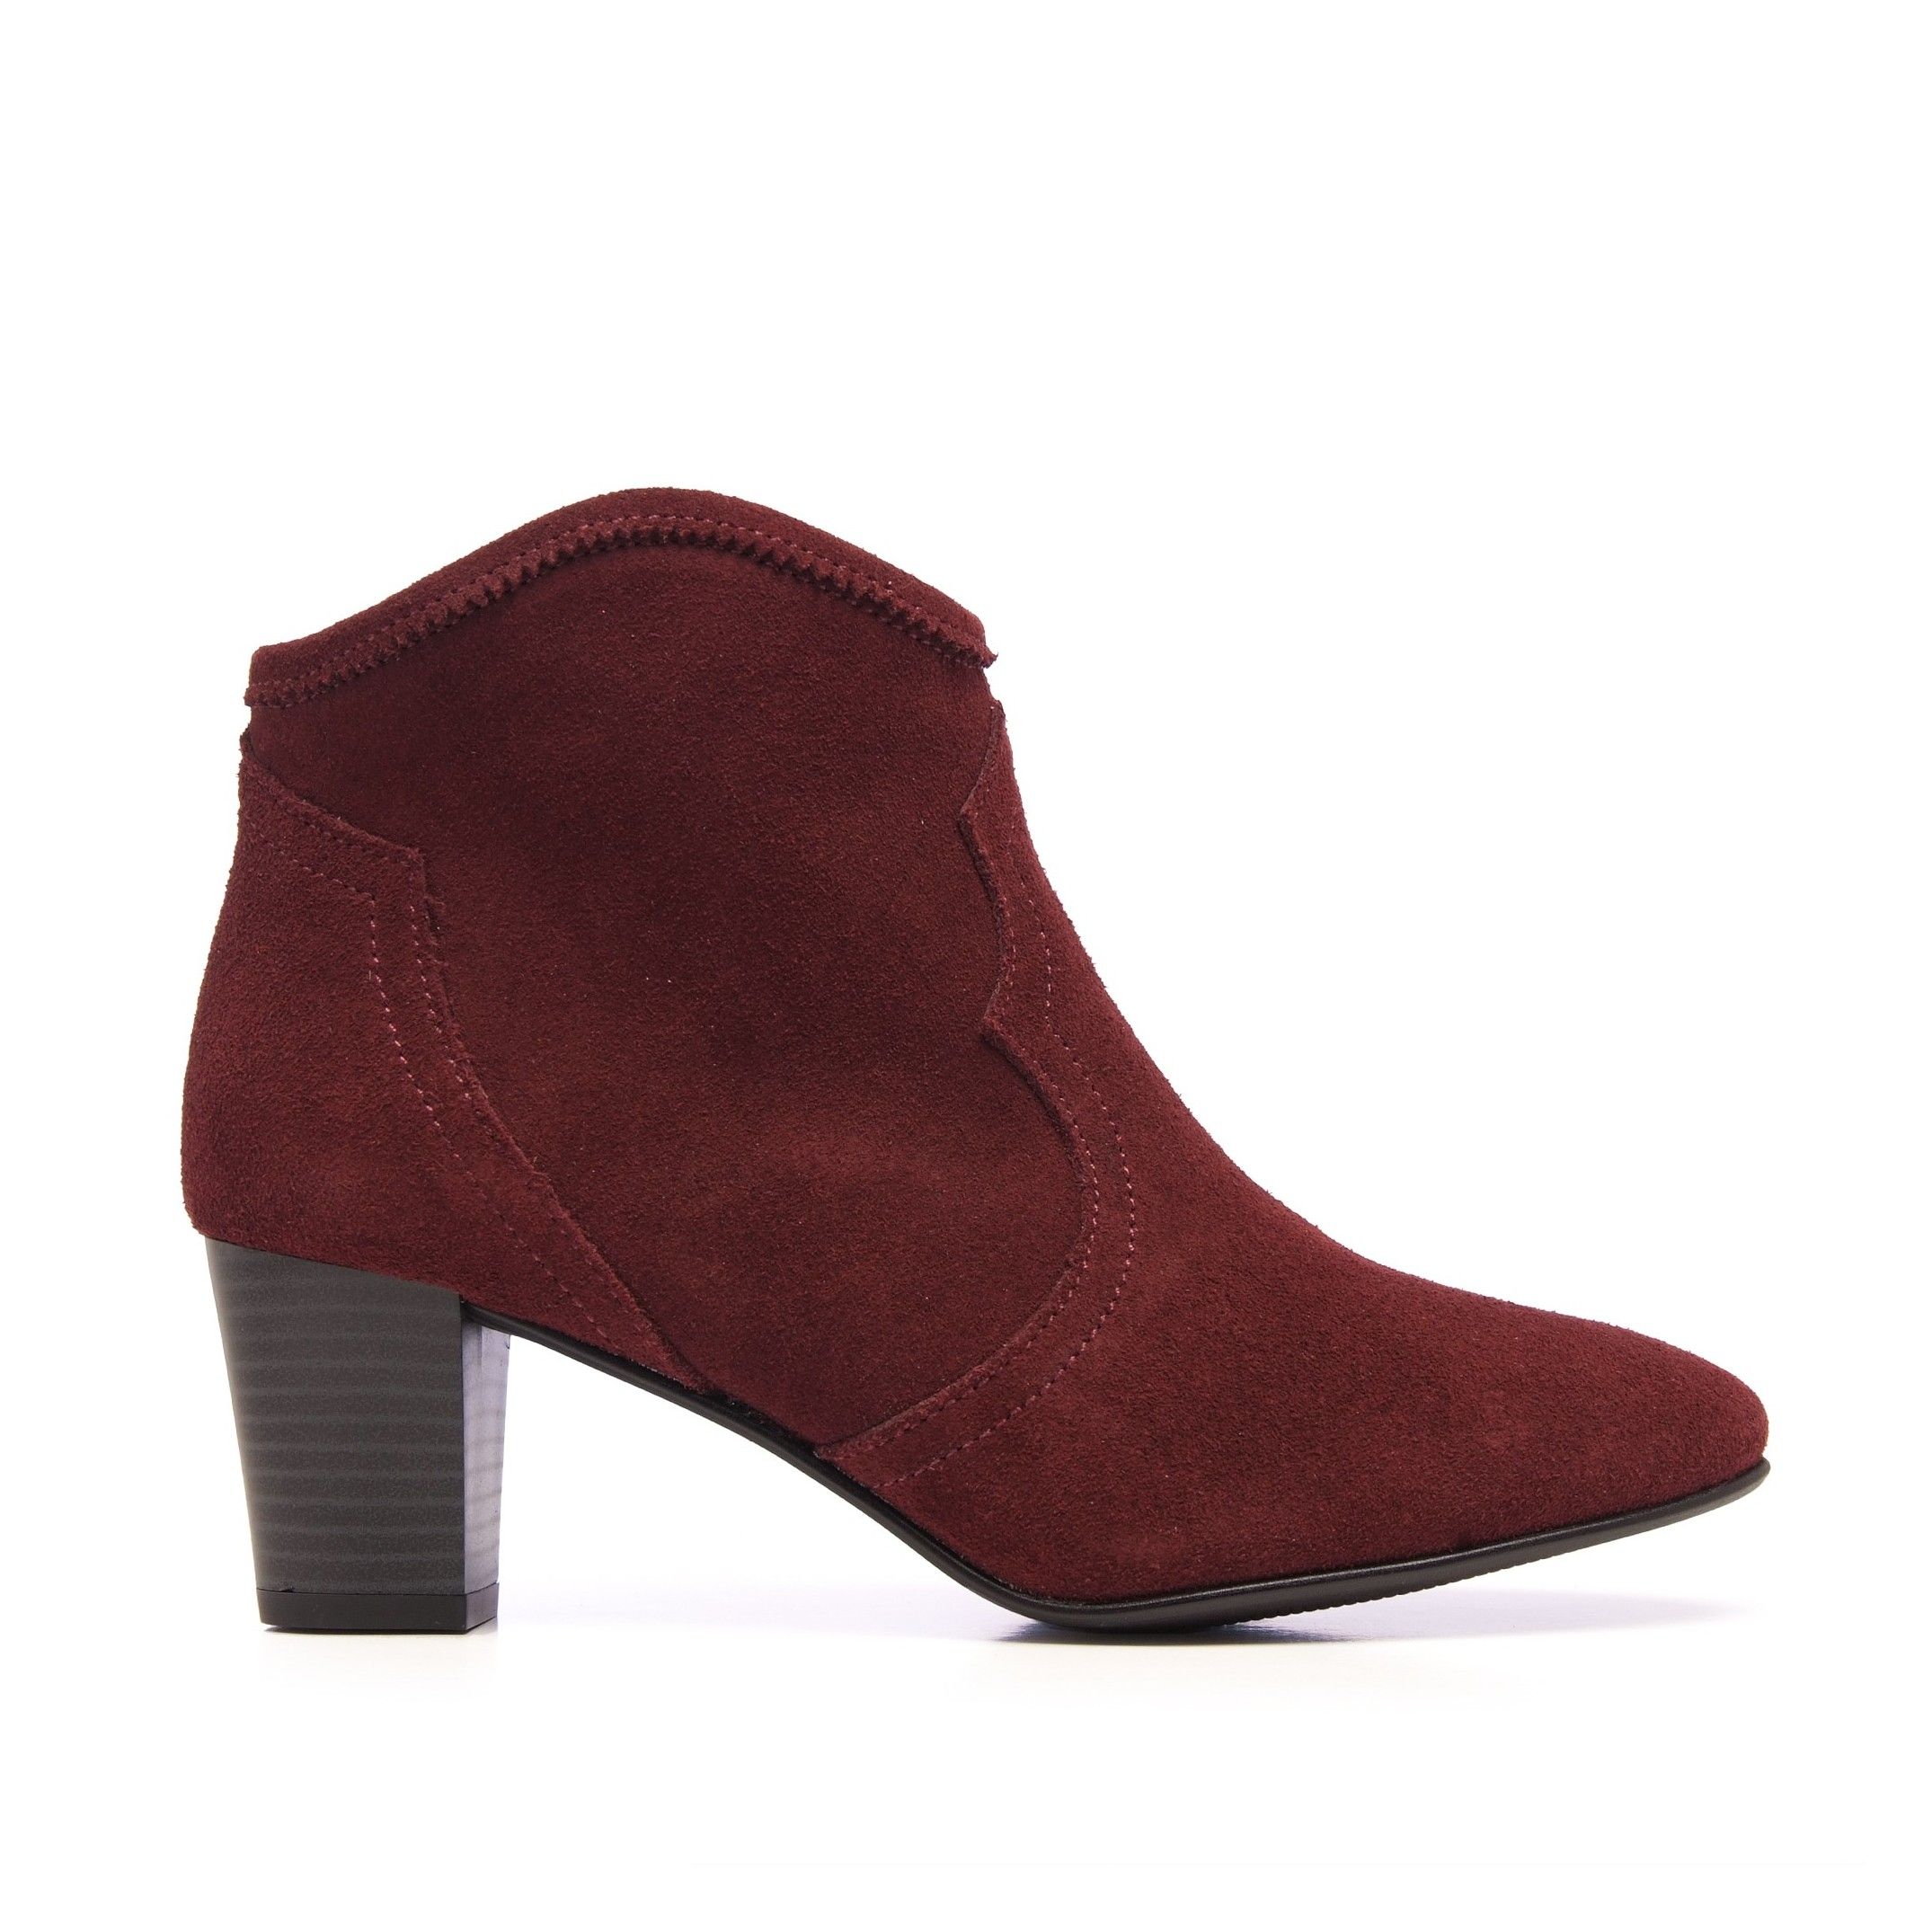 Casual ankle boots with high heel. Zipper closure. Upper, inner and insole made of leather. Heel: 6 cm. Made in Spain.